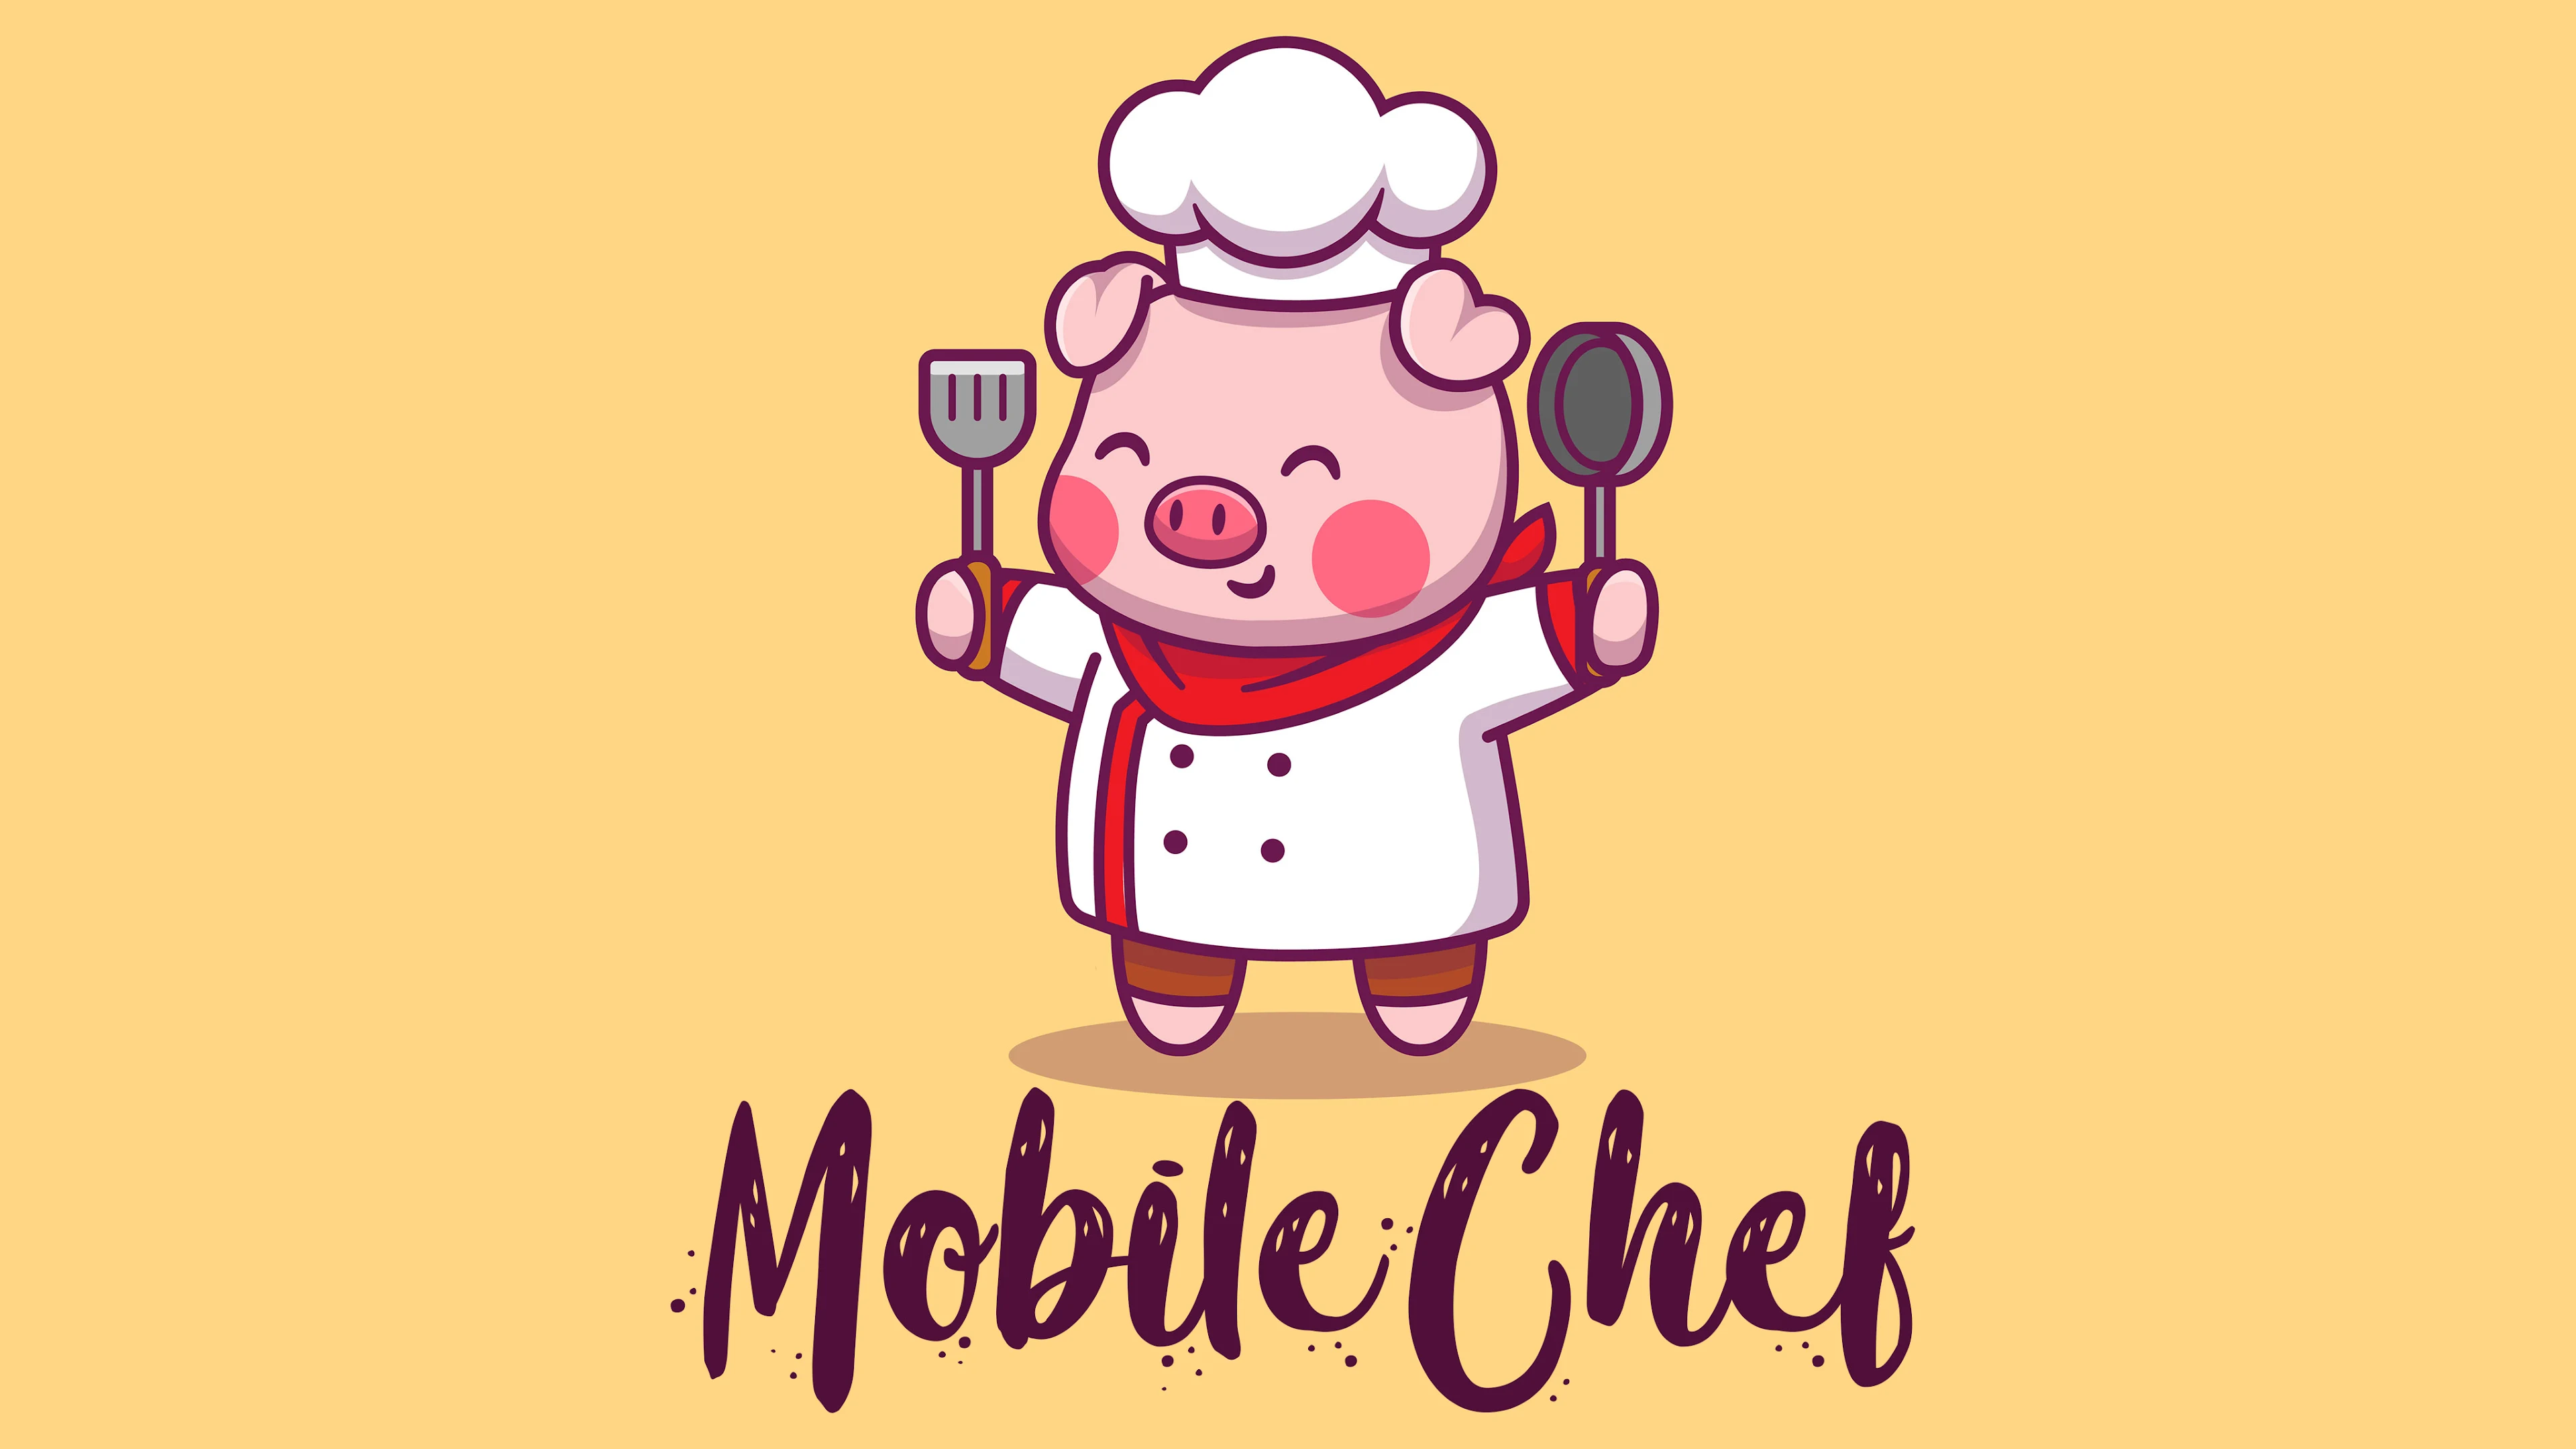 chef pigster nabnab wallpaper - Apps on Google Play